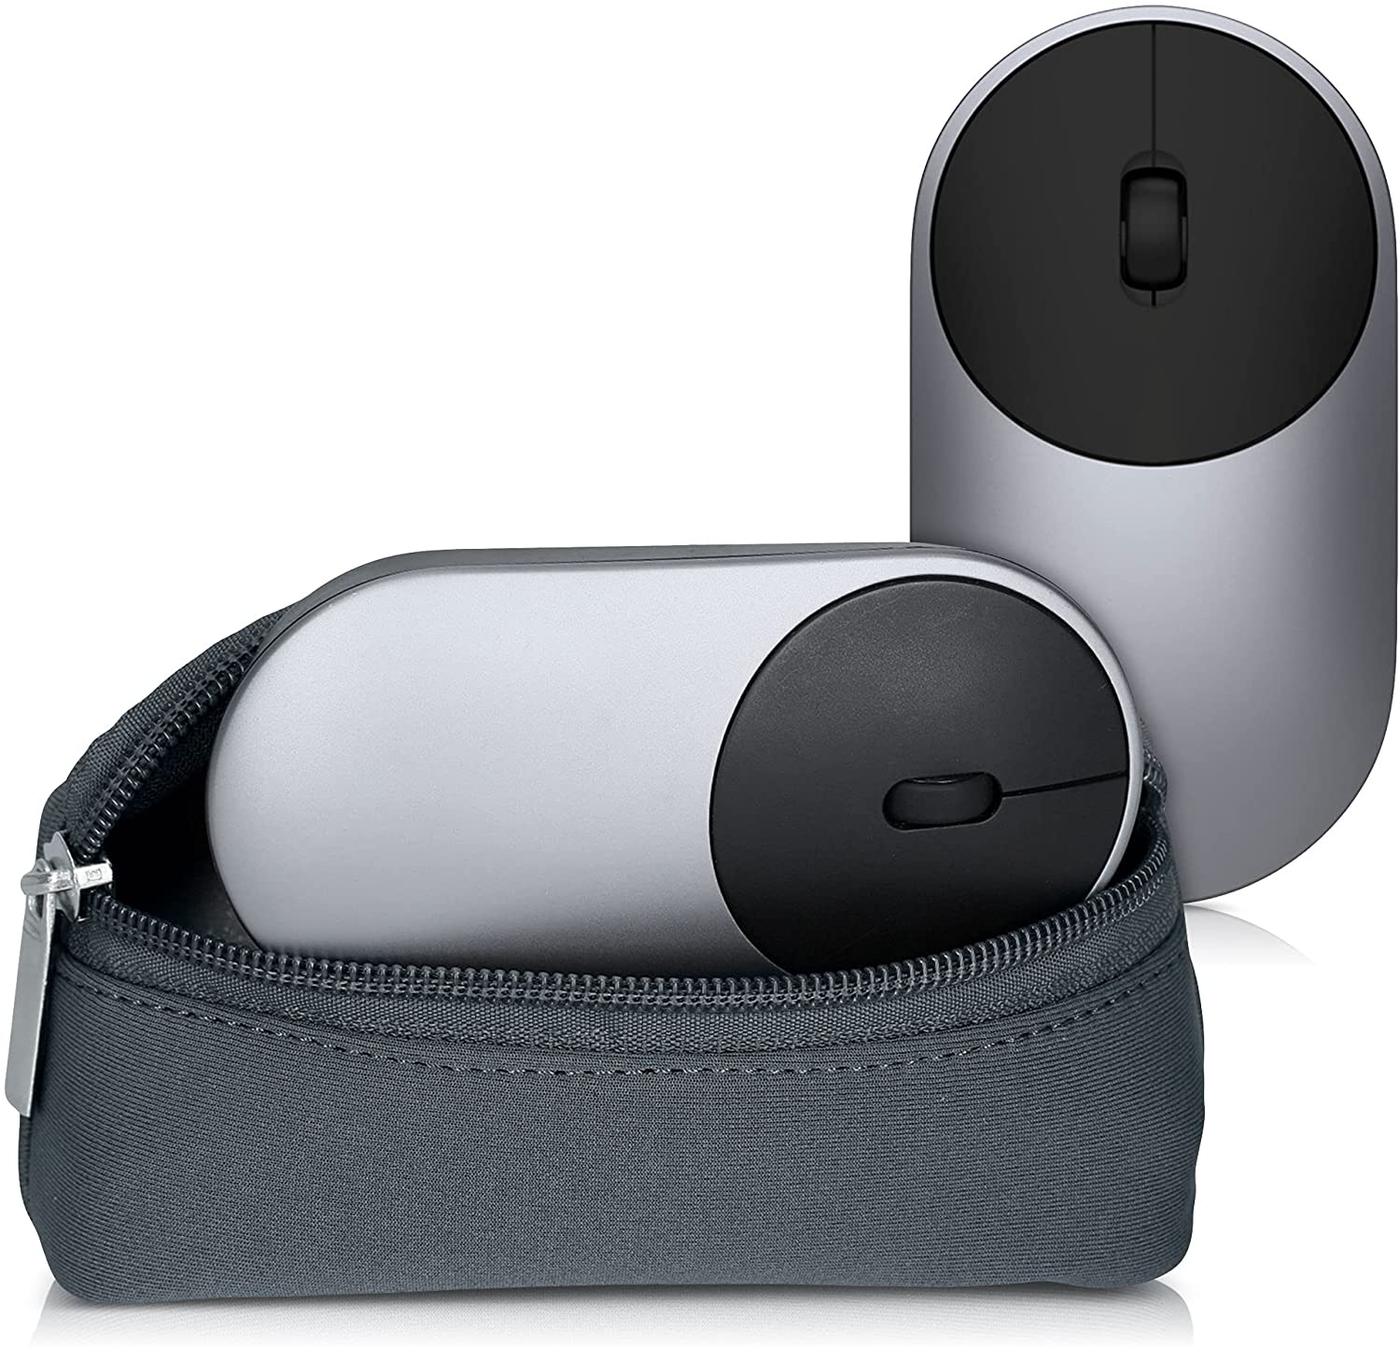 kwmobile Neoprene Pouch Compatible with Universal Wireless Mouse - Storage Carrying Case Dust Cover with Zipper - Grey